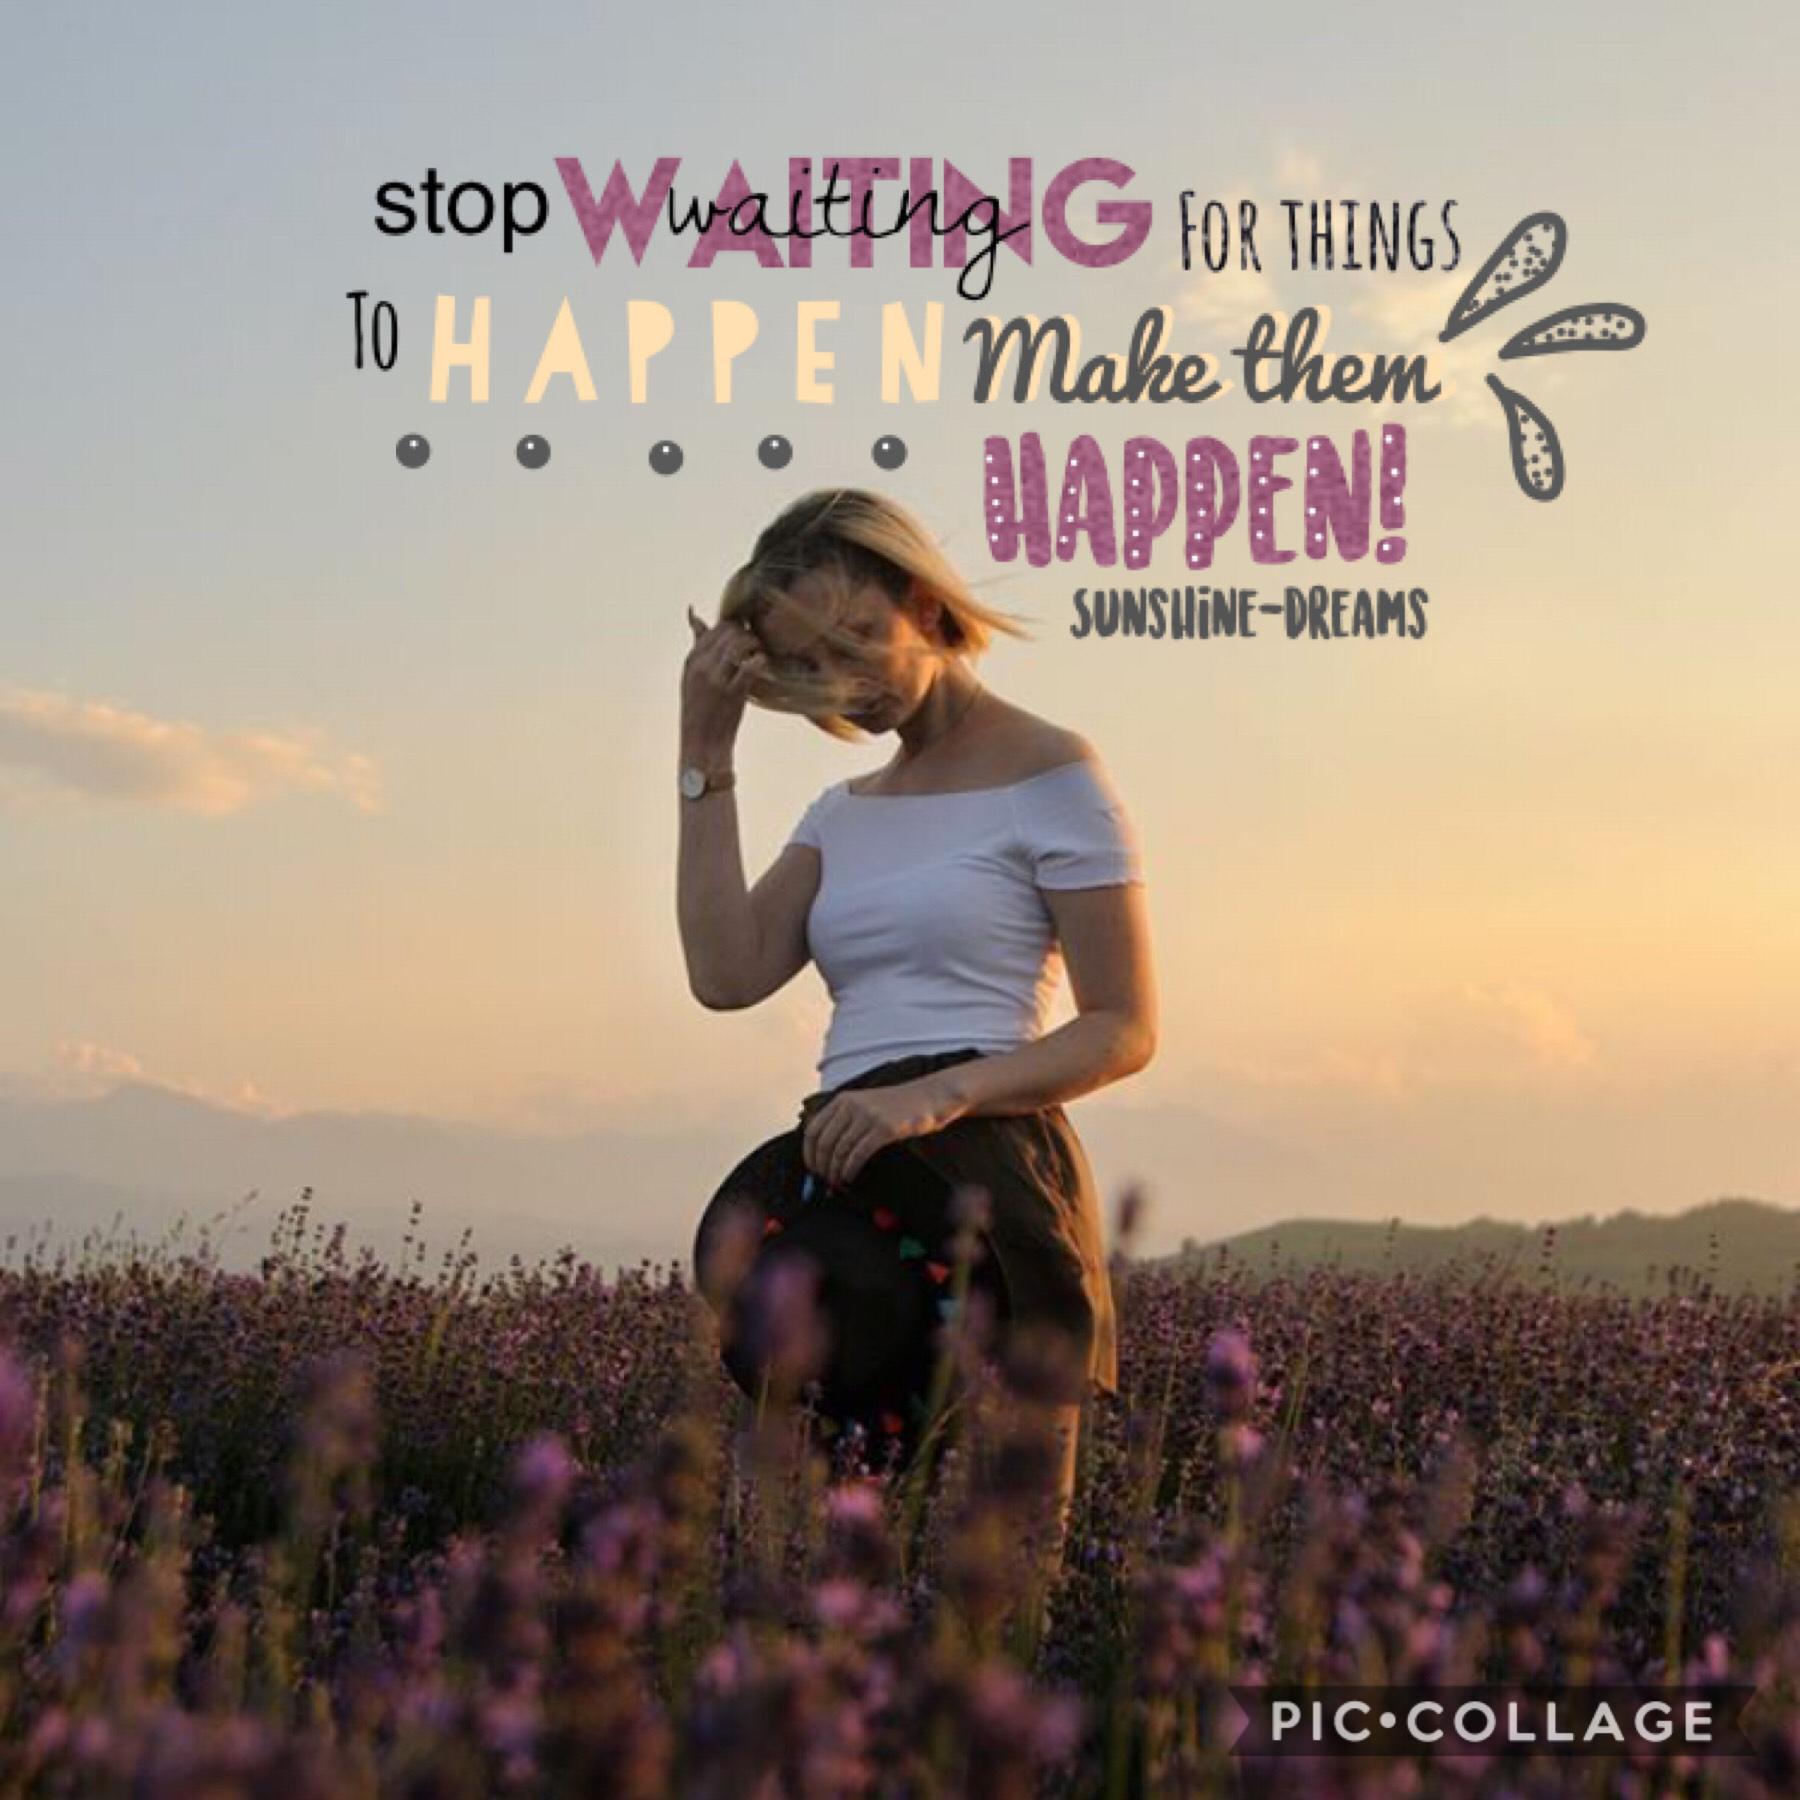 🌾tap🌾

Stop waiting for things to happen, make them happen! 

QOTD: what’s your favorite color? 
AOTD: I love the color of purple that I used in this collage! 